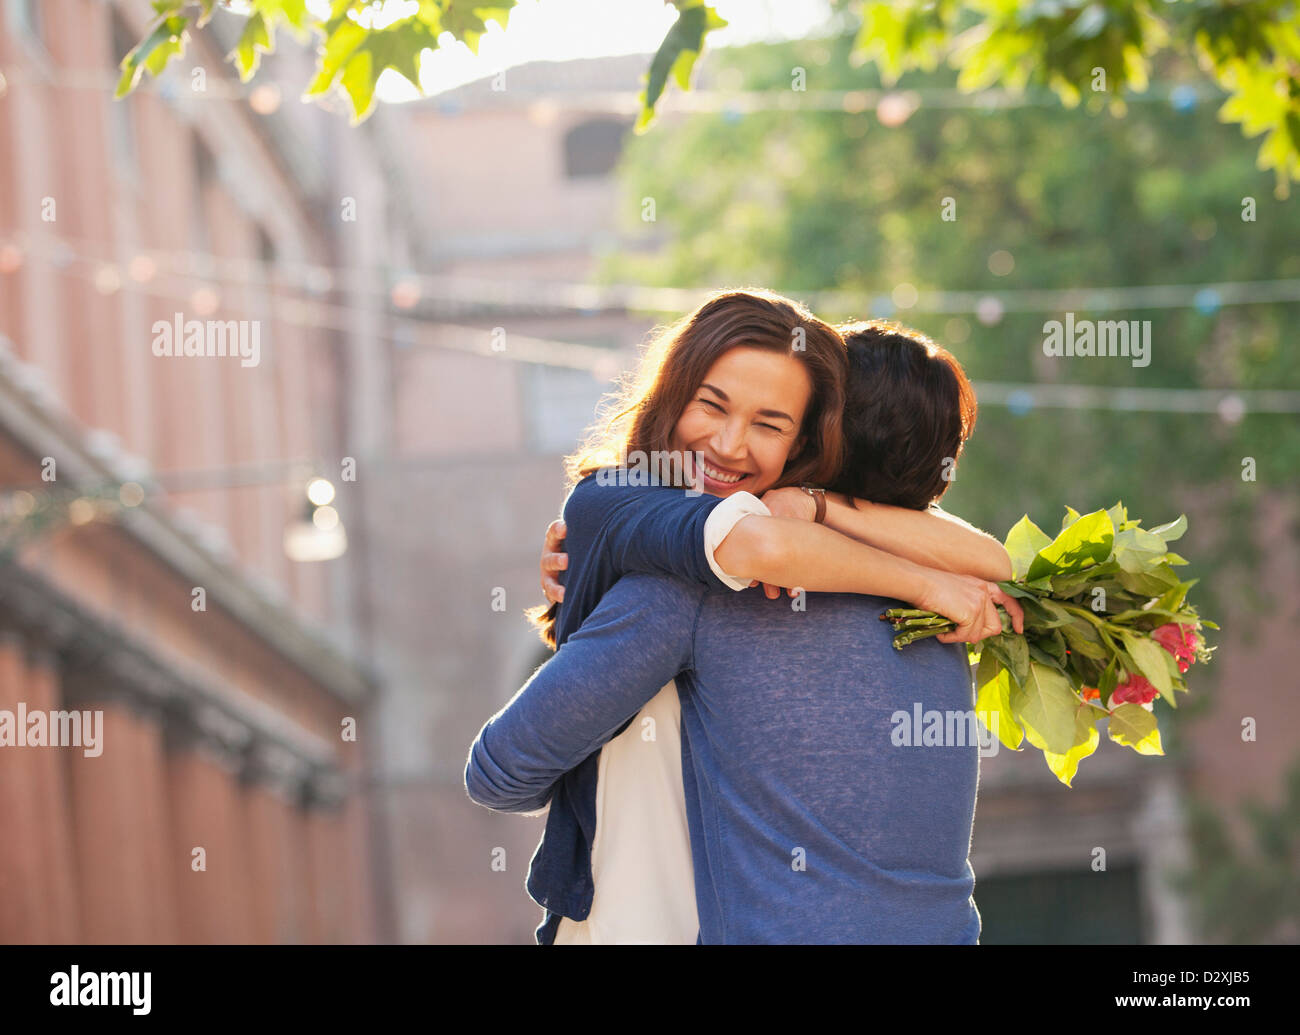 Smiling woman with flowers hugging man Stock Photo